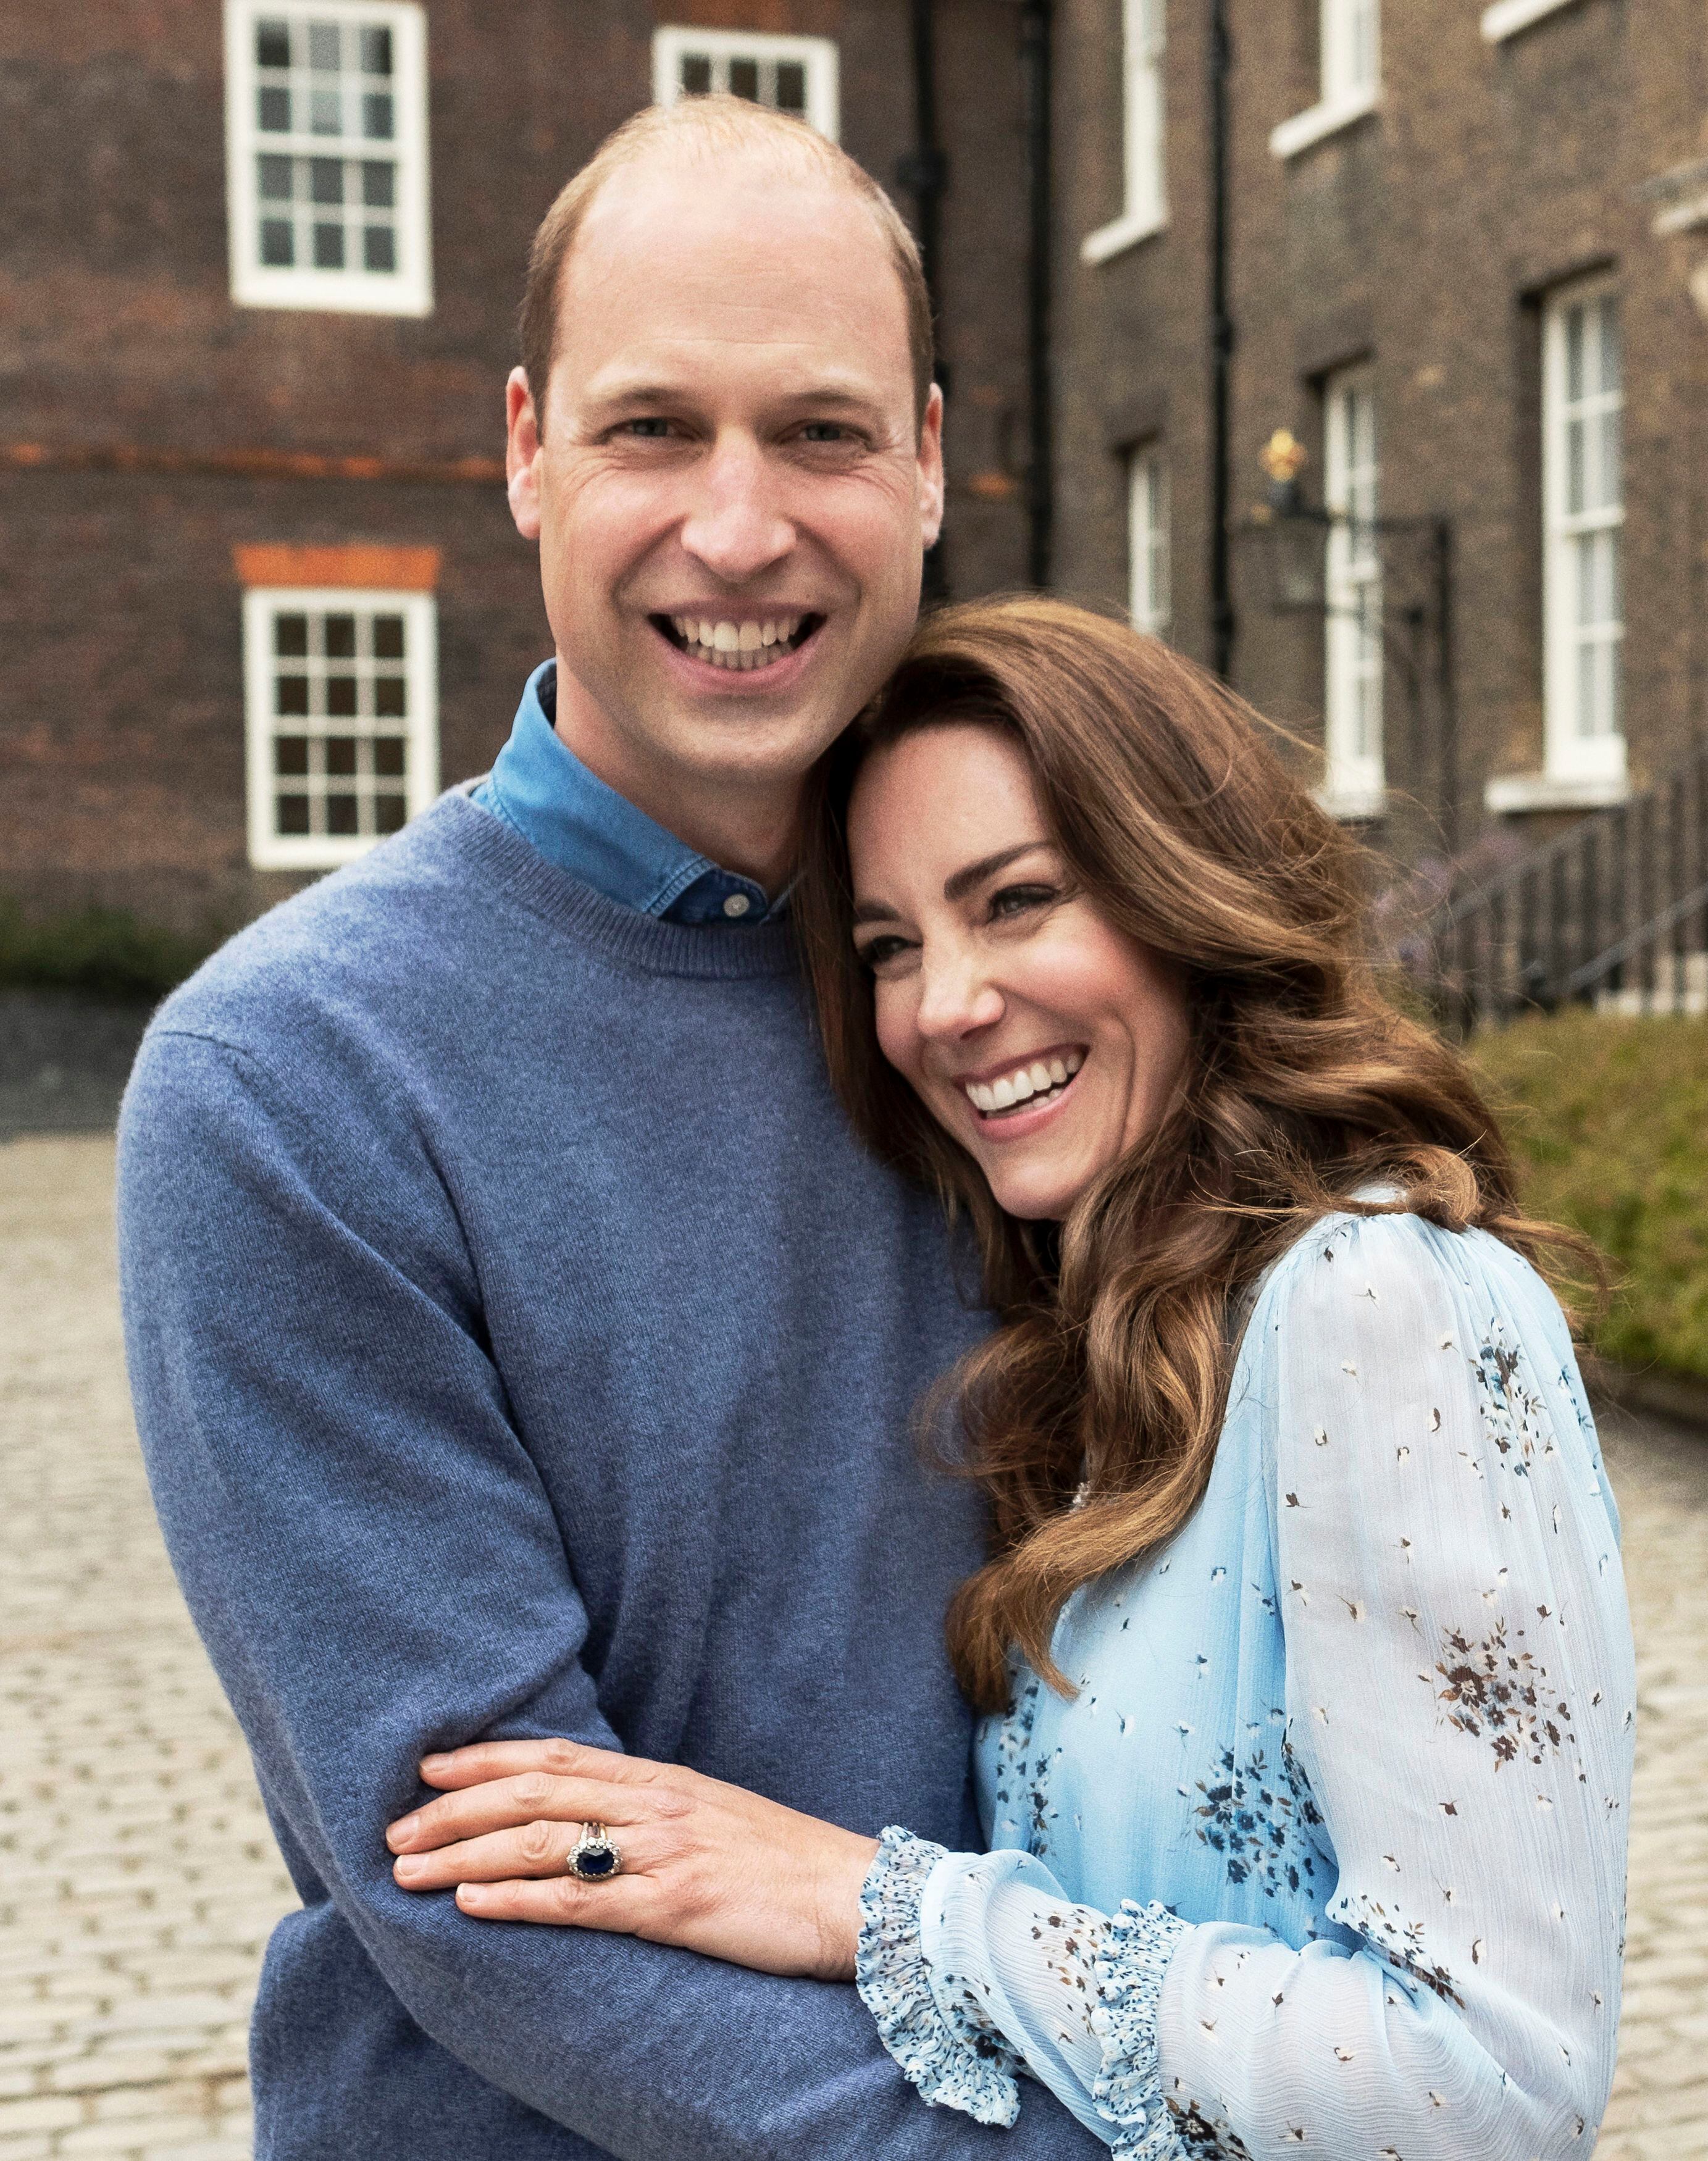 Prince William, Kate release photos to mark 10th anniversary